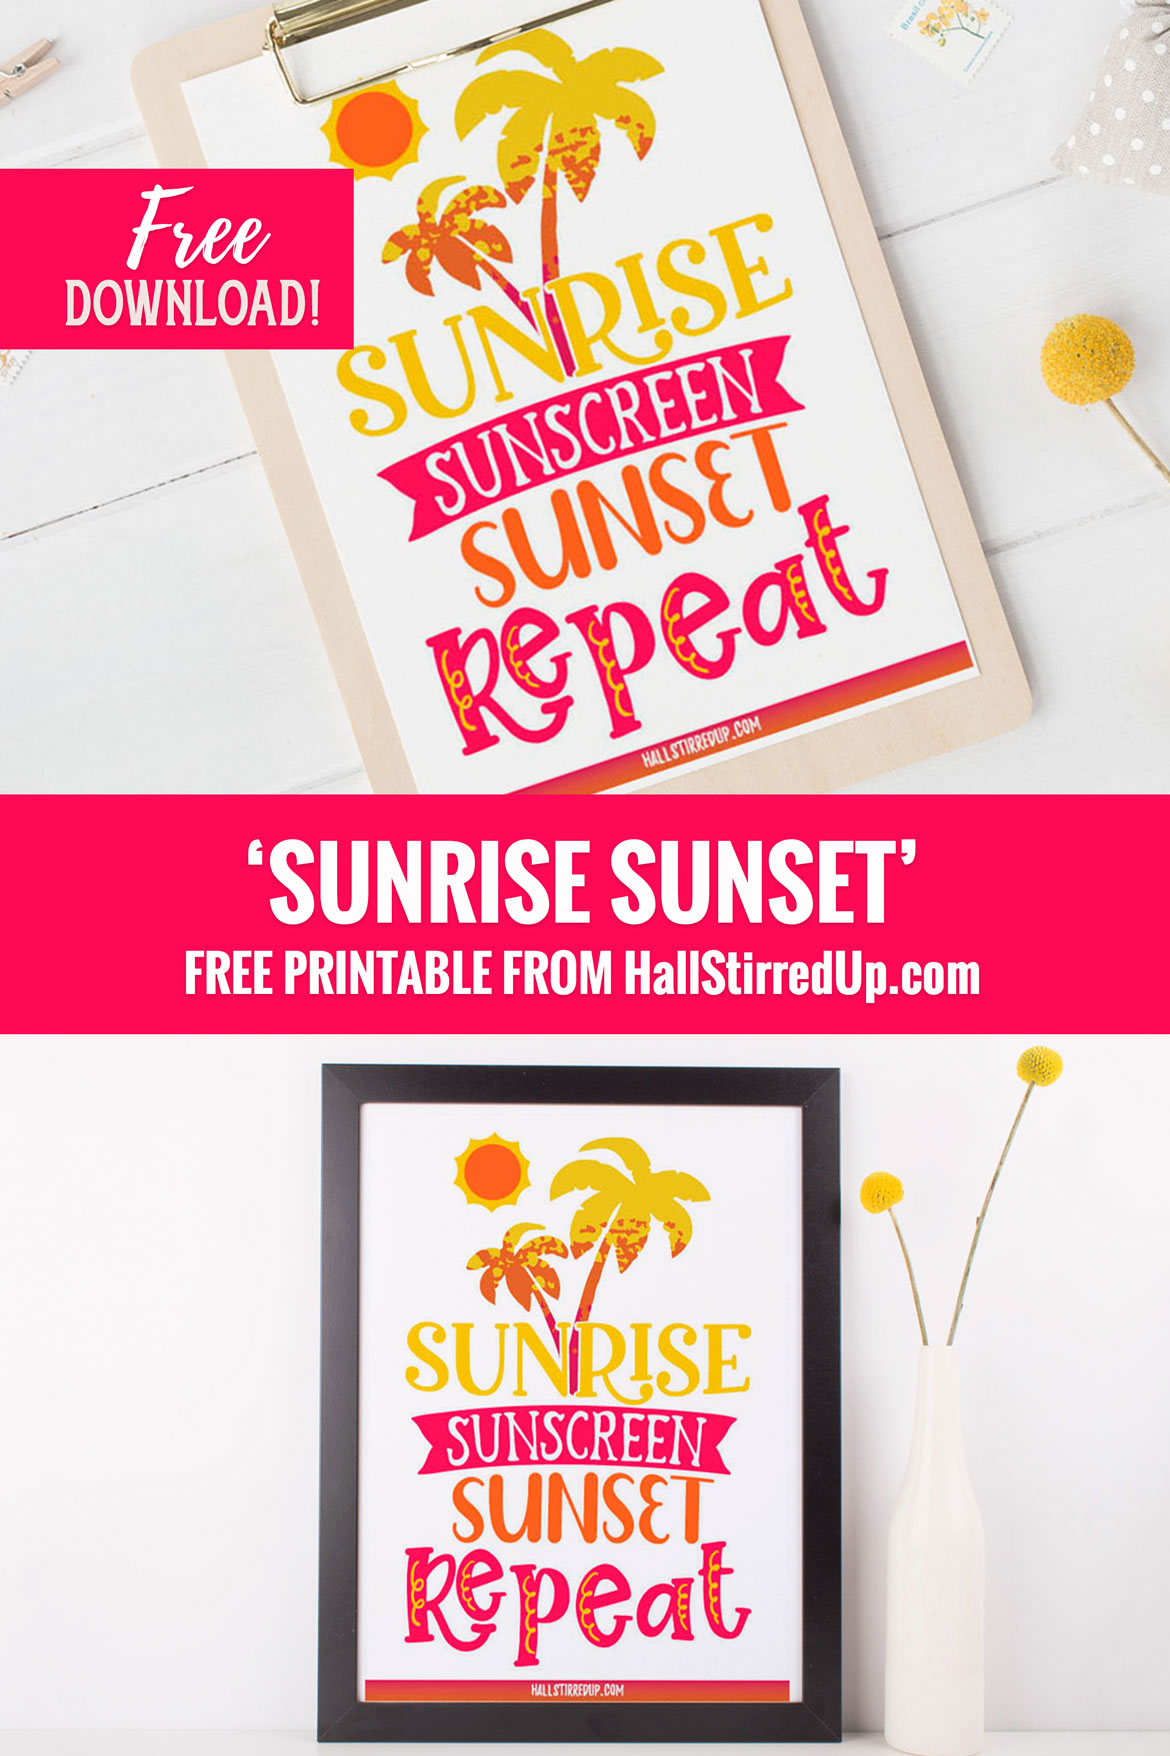 Sunrise and sunset on repeat Includes fun printable